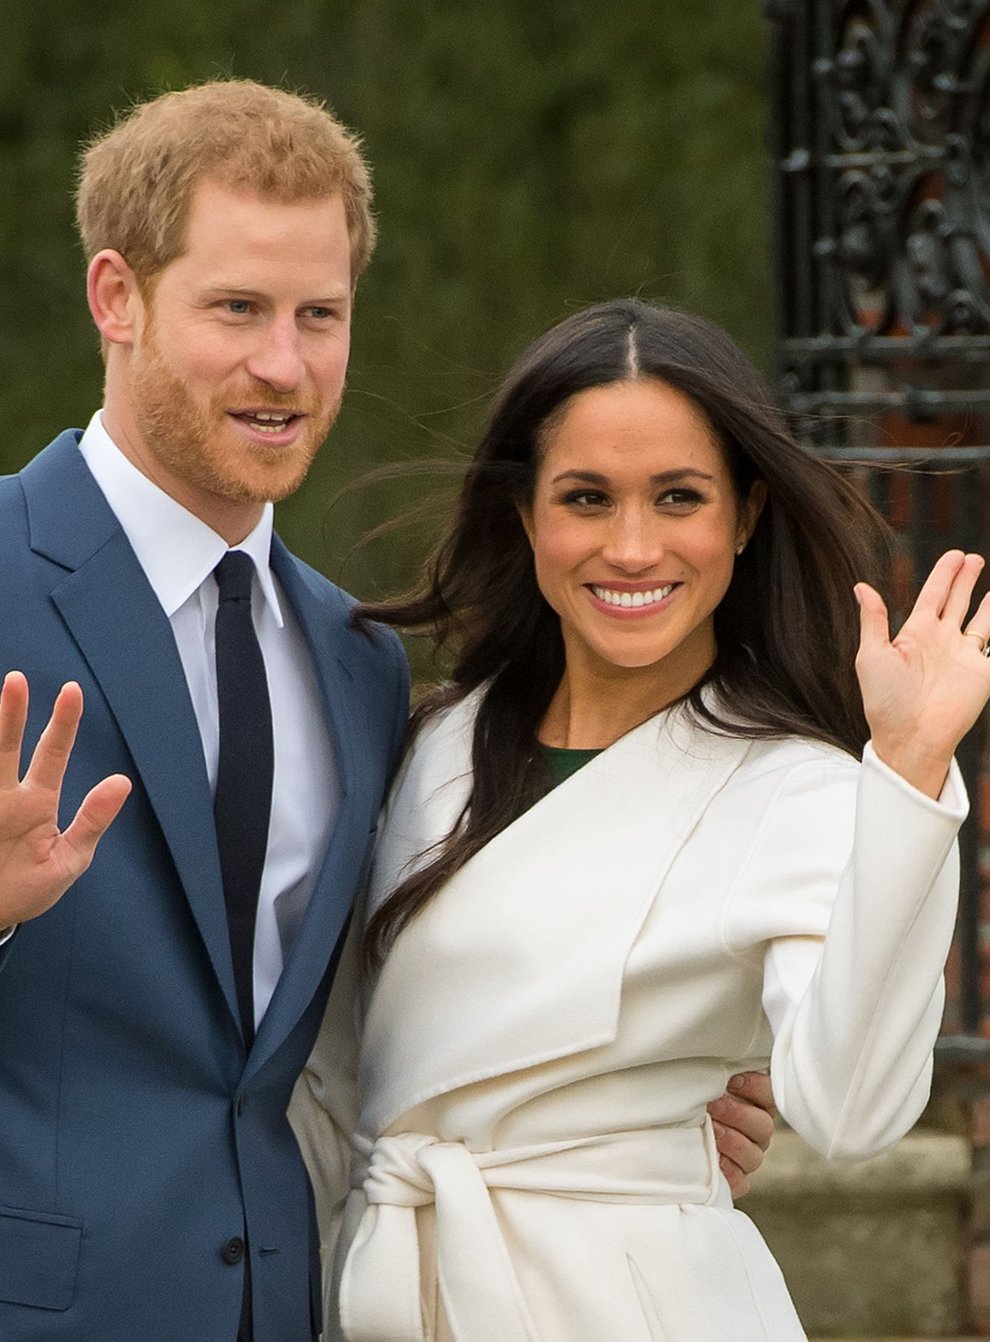 Harry and Meghan have encouraged Americans to vote in the election